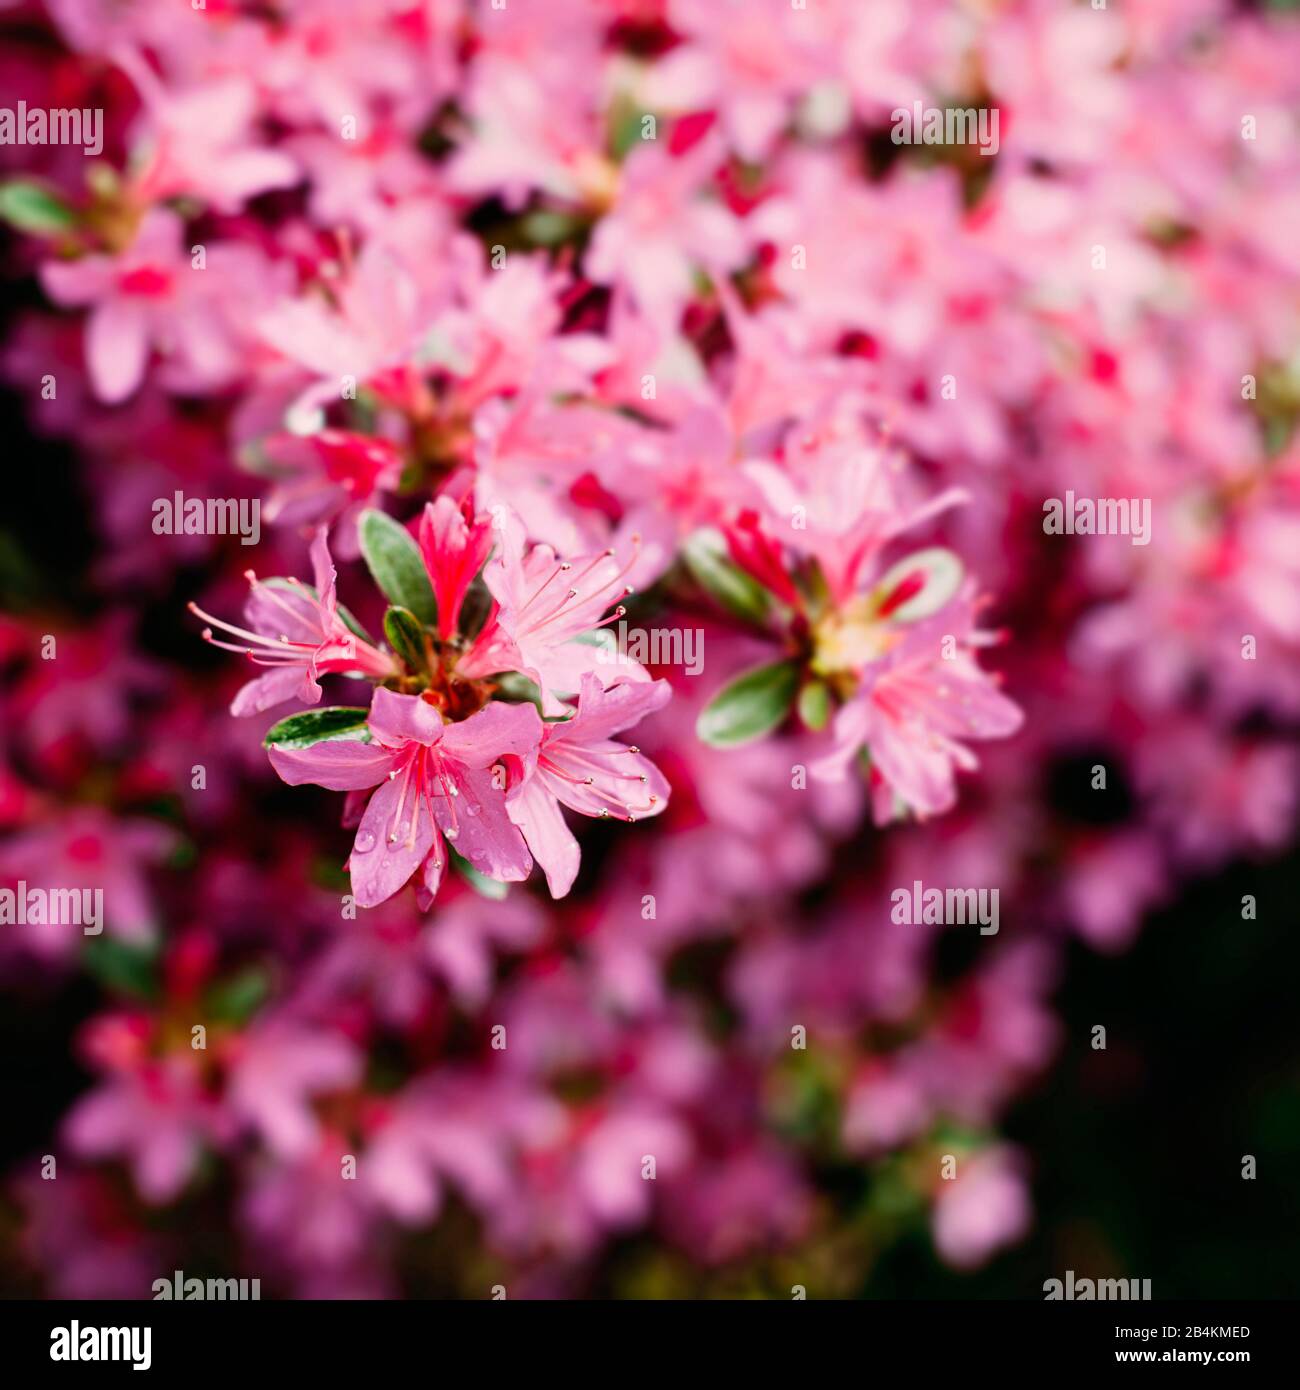 Nature details, blooming rhododentron, close-up Stock Photo